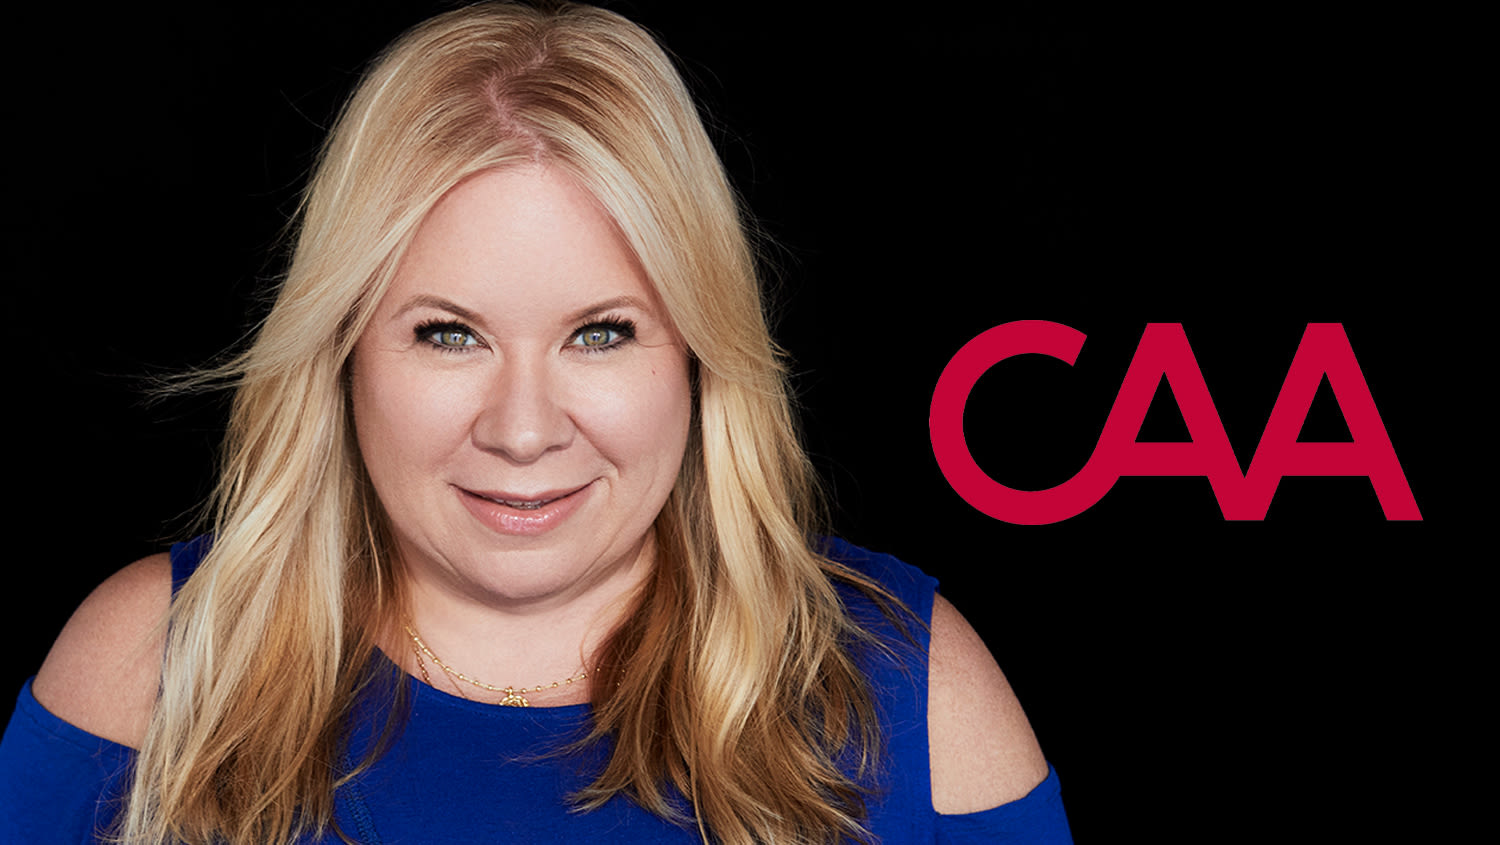 Julie Plec Signs With CAA